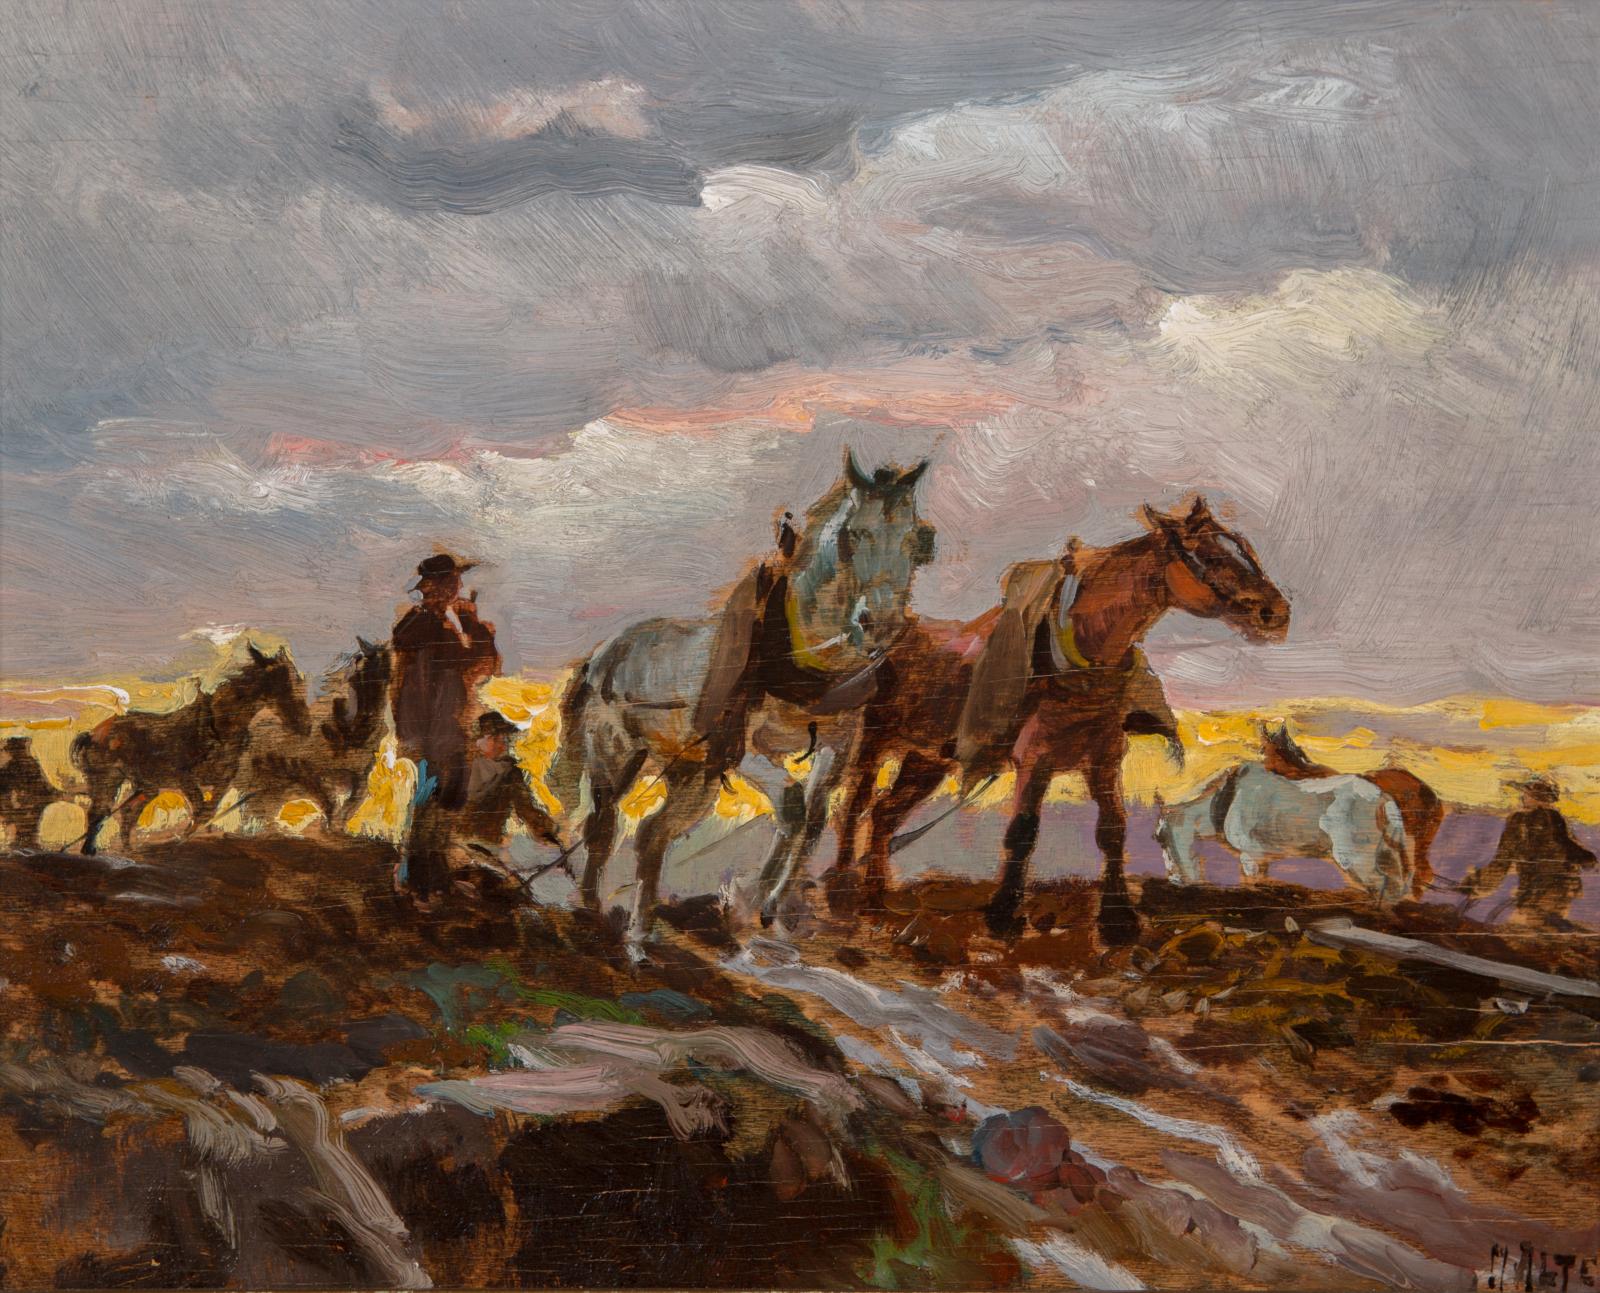 Silhouette of horses in a work field with a yellow sunset under a gray, overcast sky in the background.